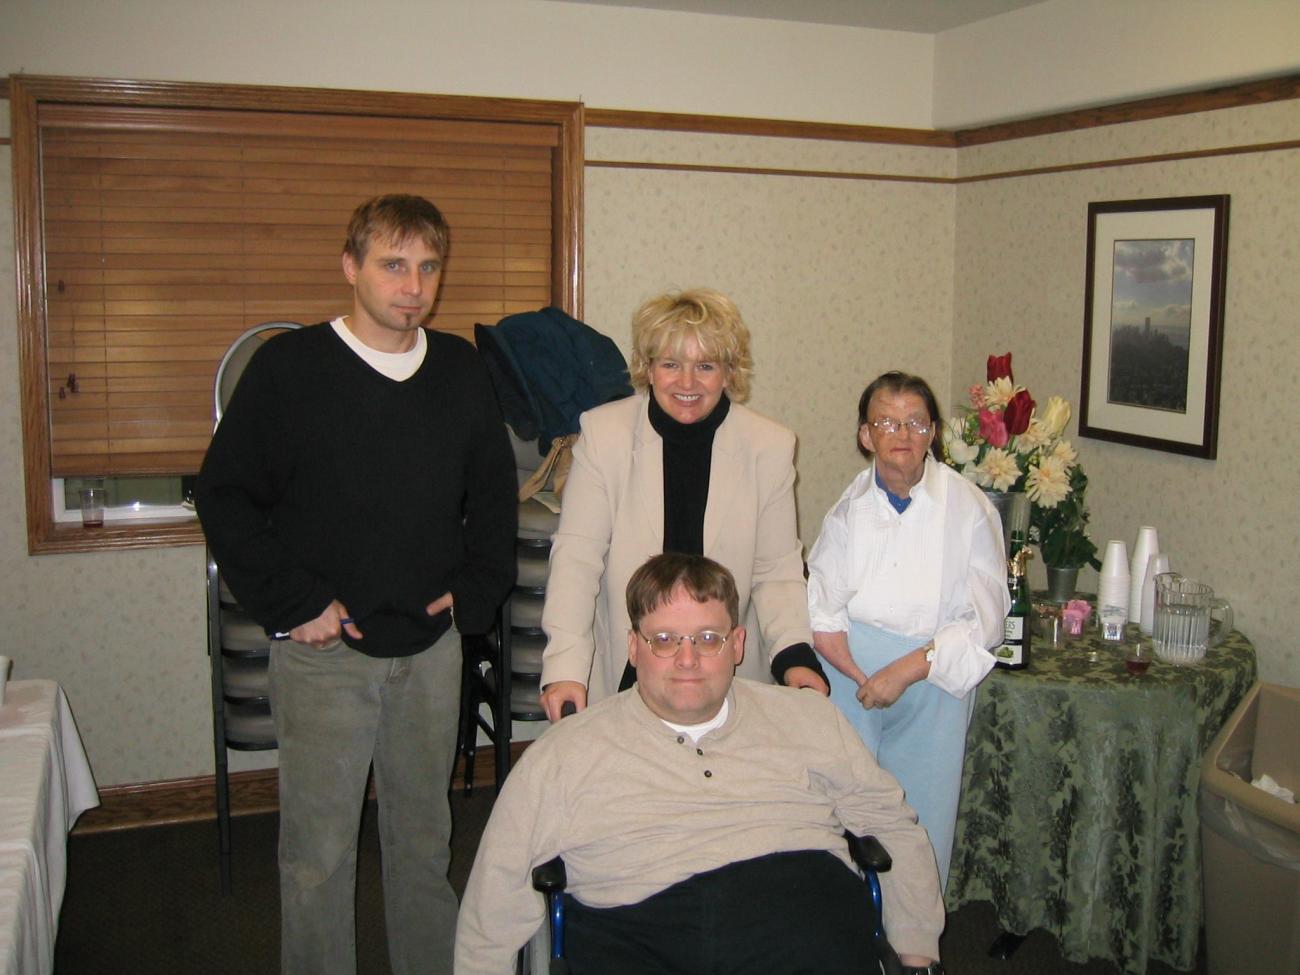 Four people posing for a photo, three standing and one in a wheelchair